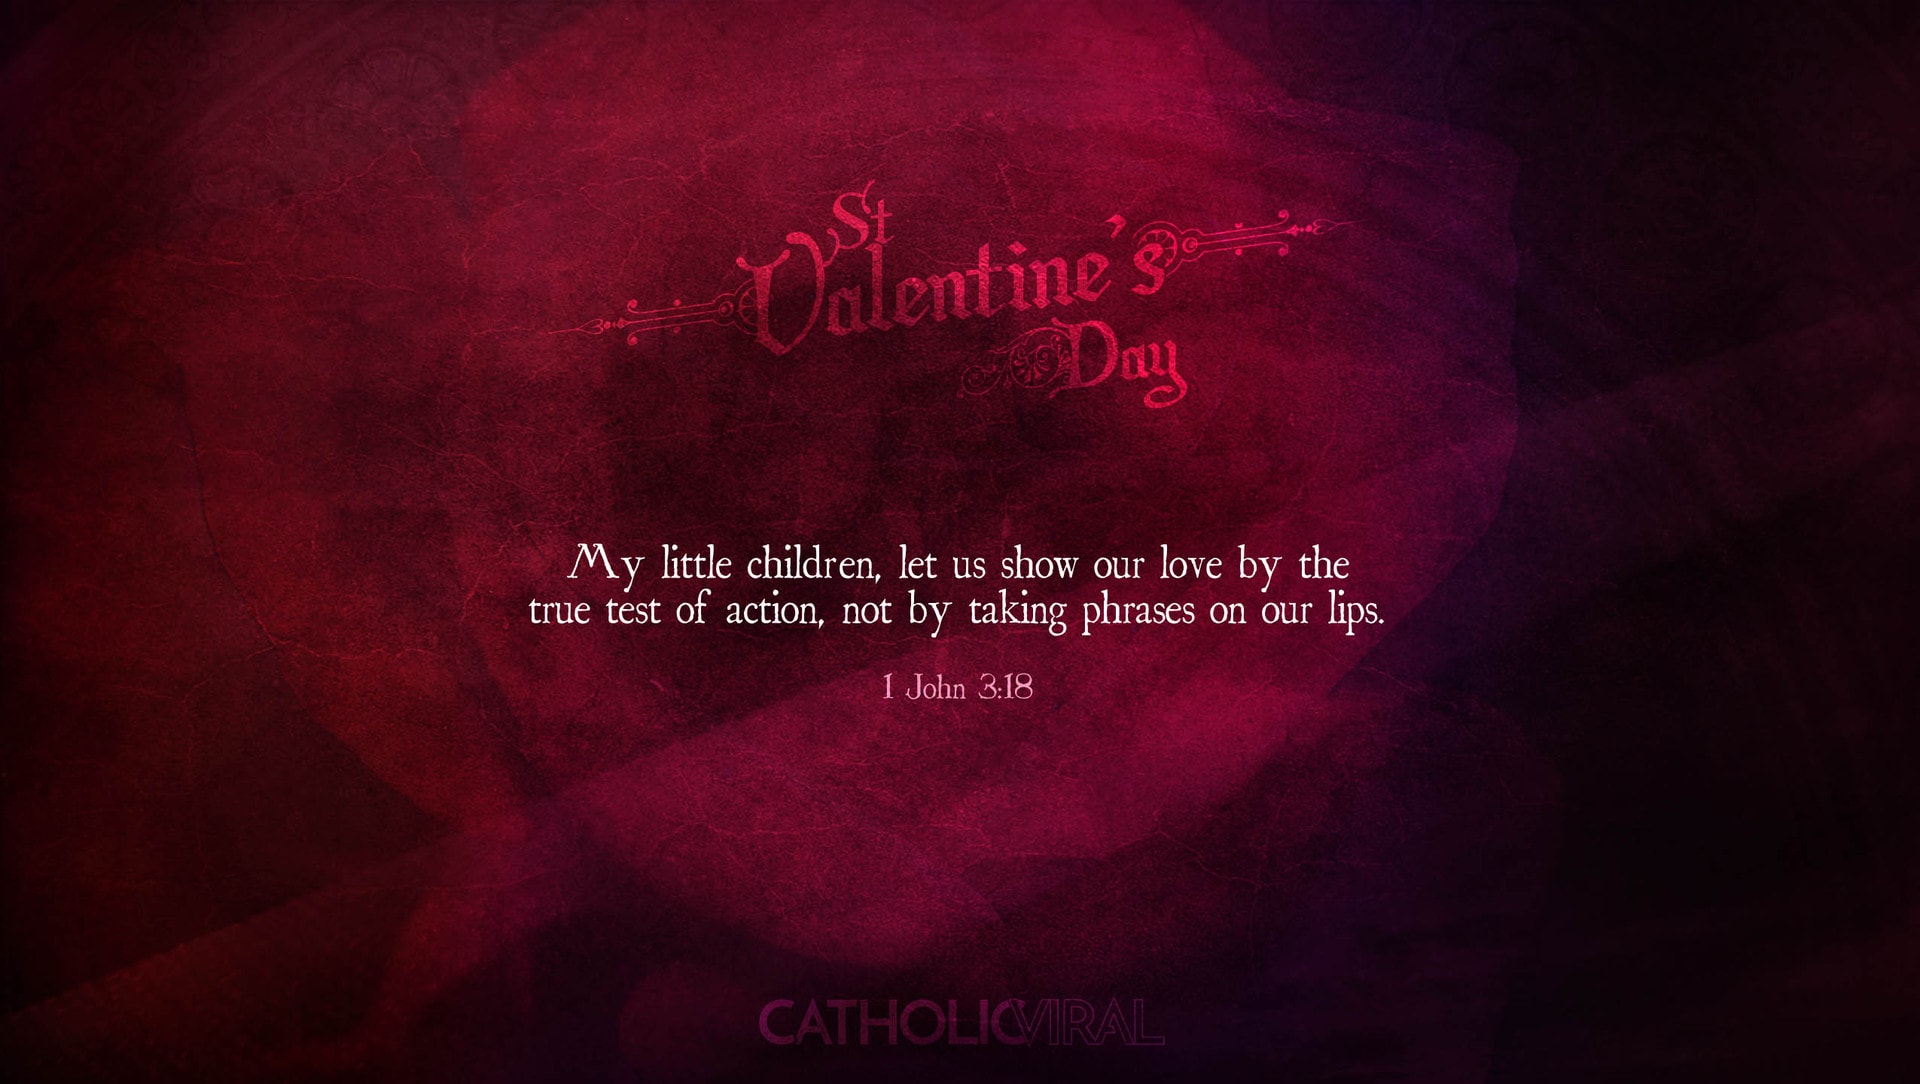 Valentines Day Bible Verses On Love Wallpaper